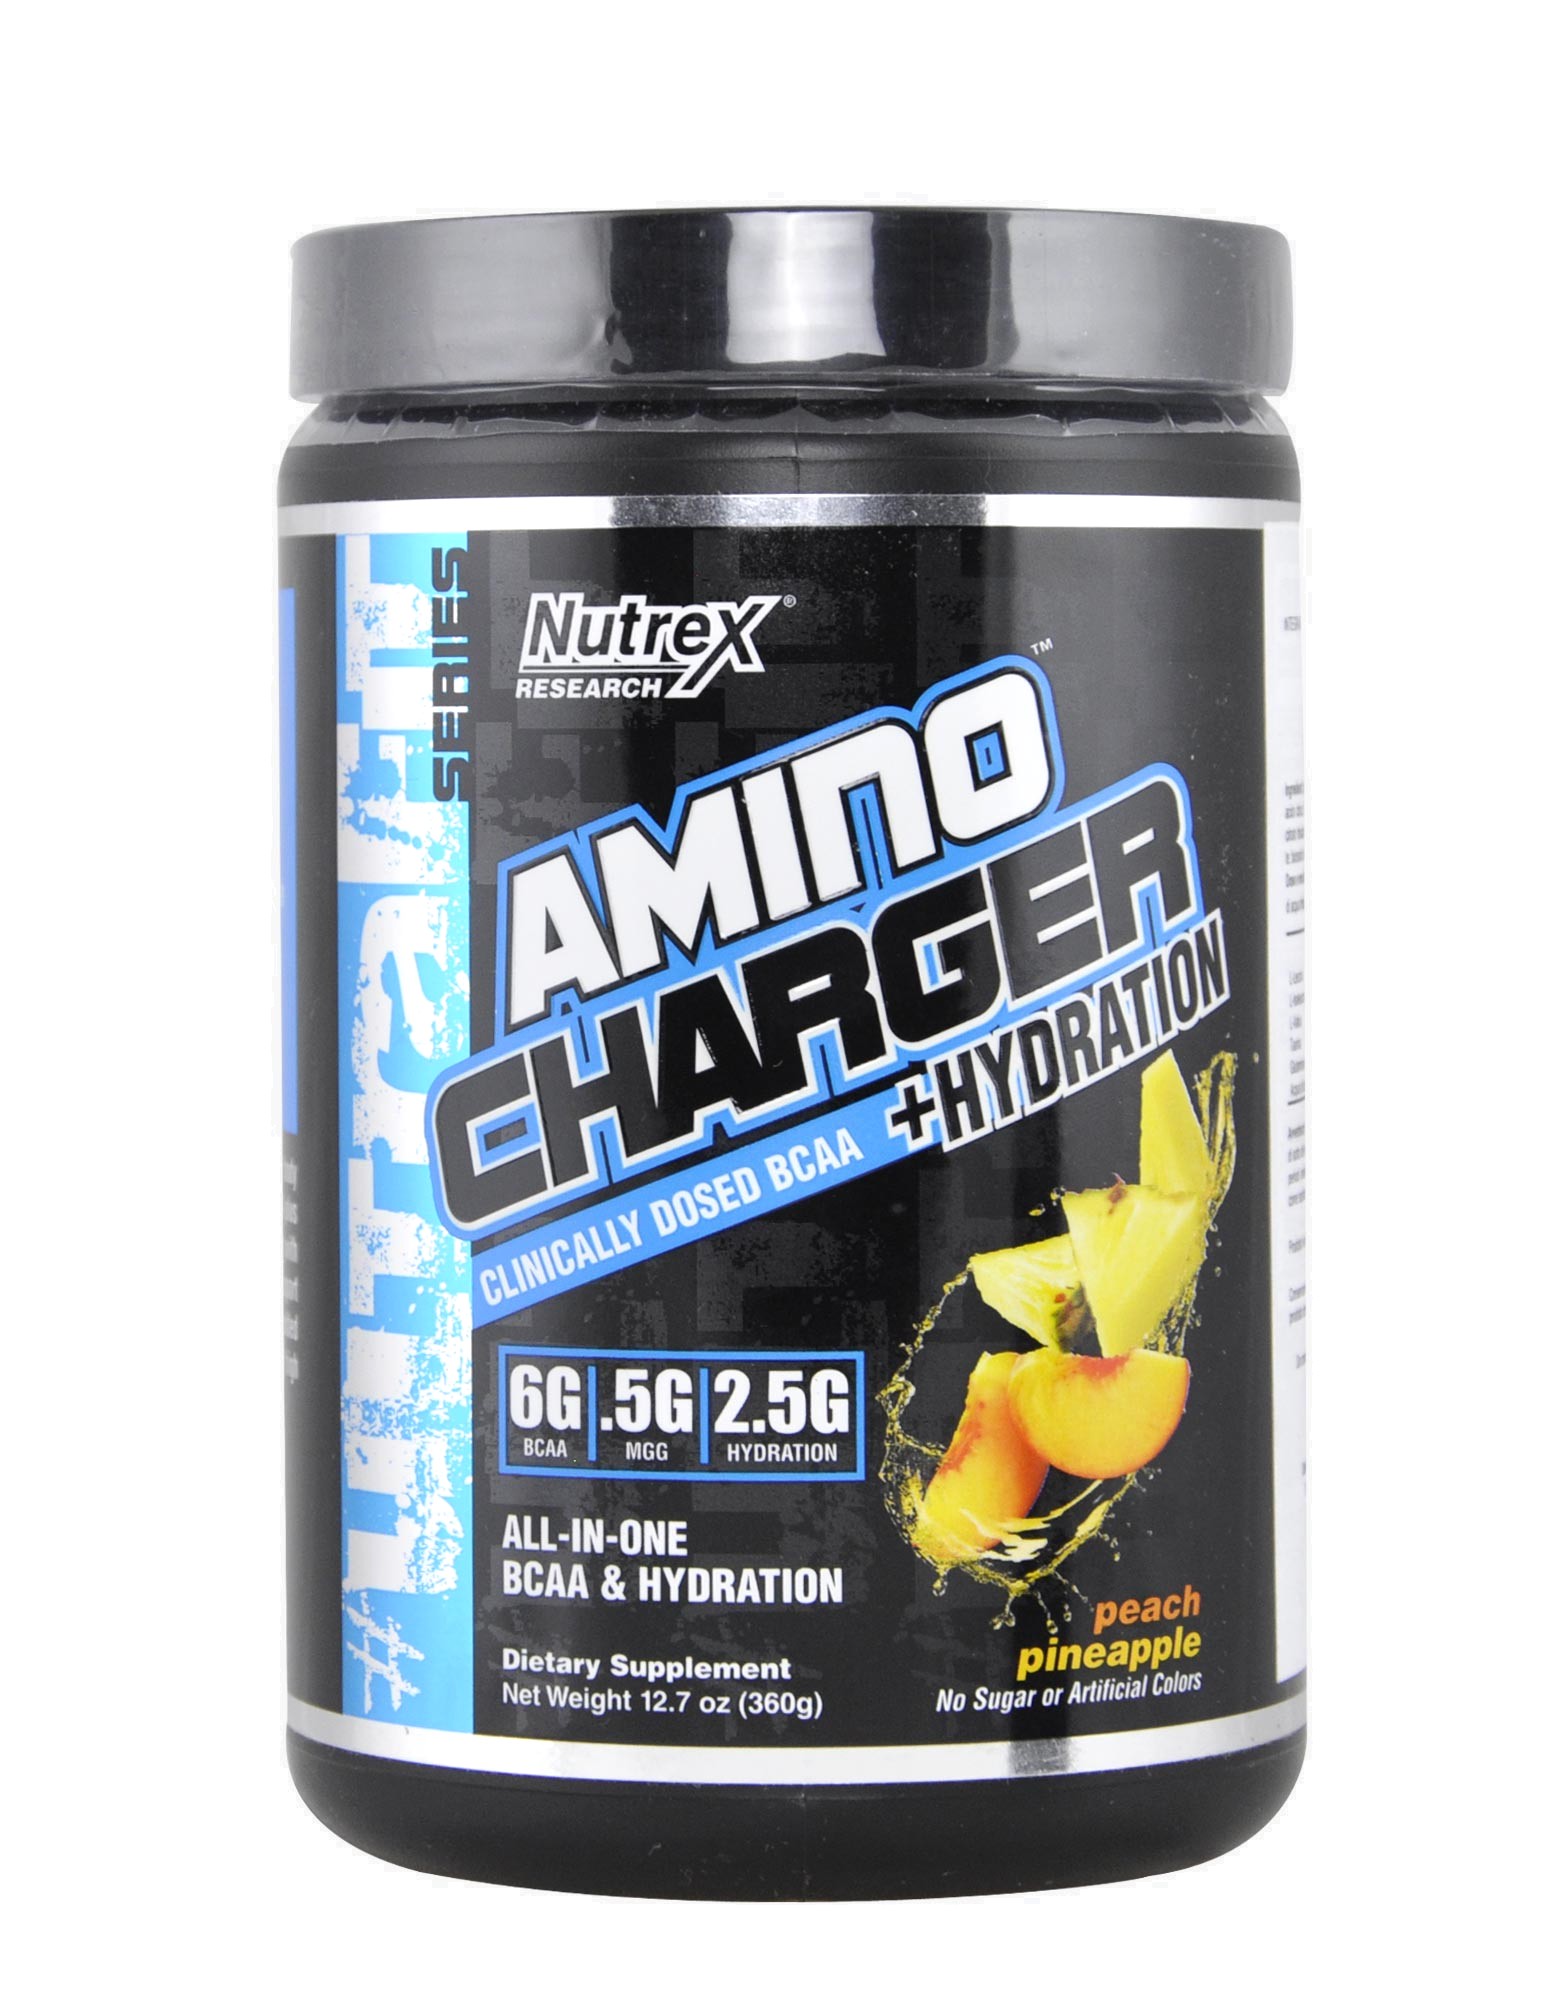 Amino Charger + Hydration by Nutrex research, 360 grams 